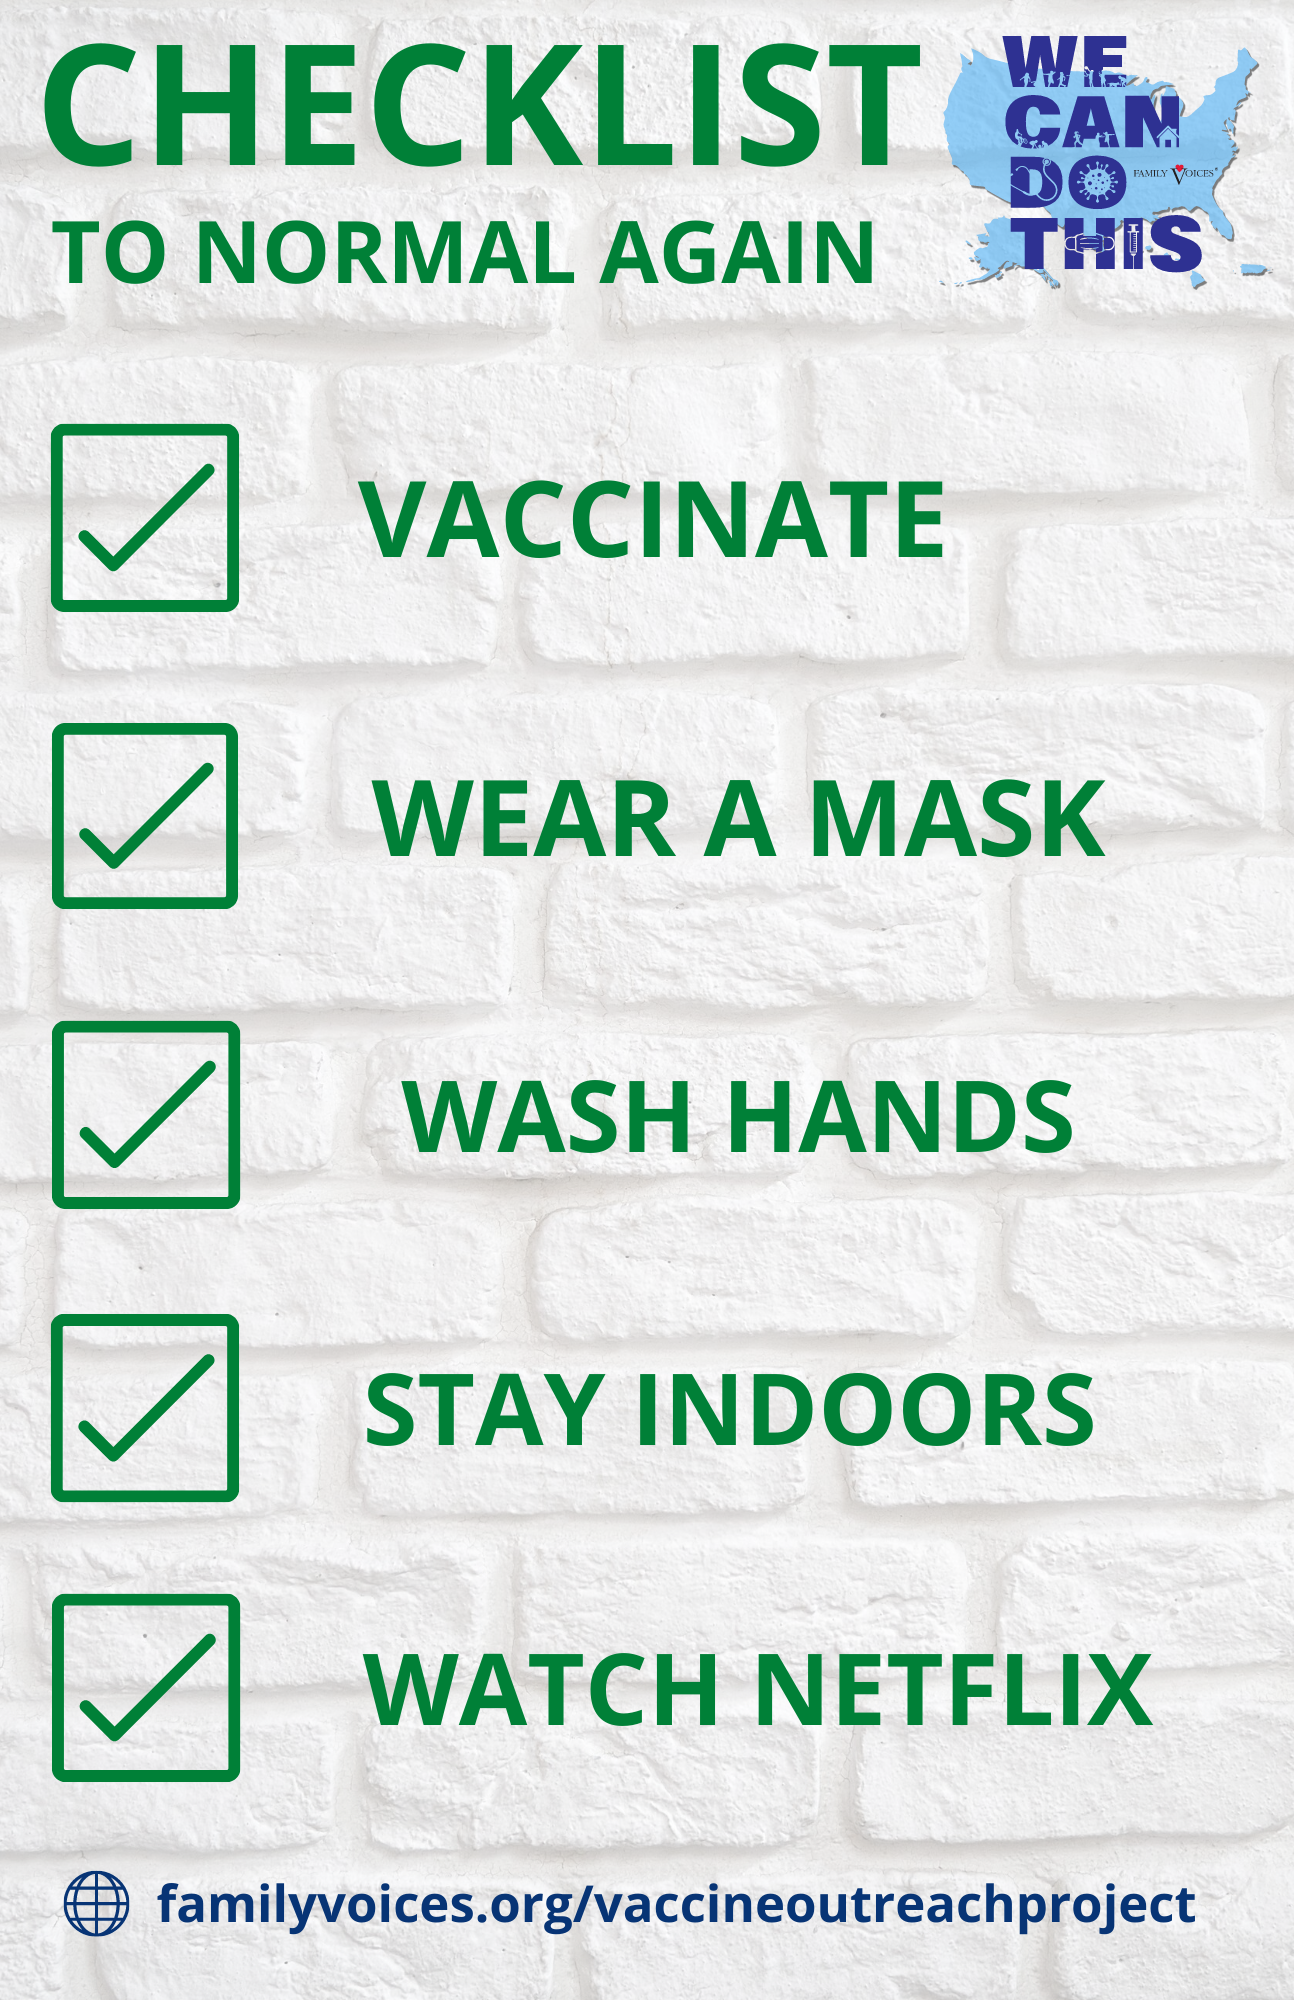 Checklist to normal again: vaccinate, wear a mask, wash hands, stay indoors, watch netflix.